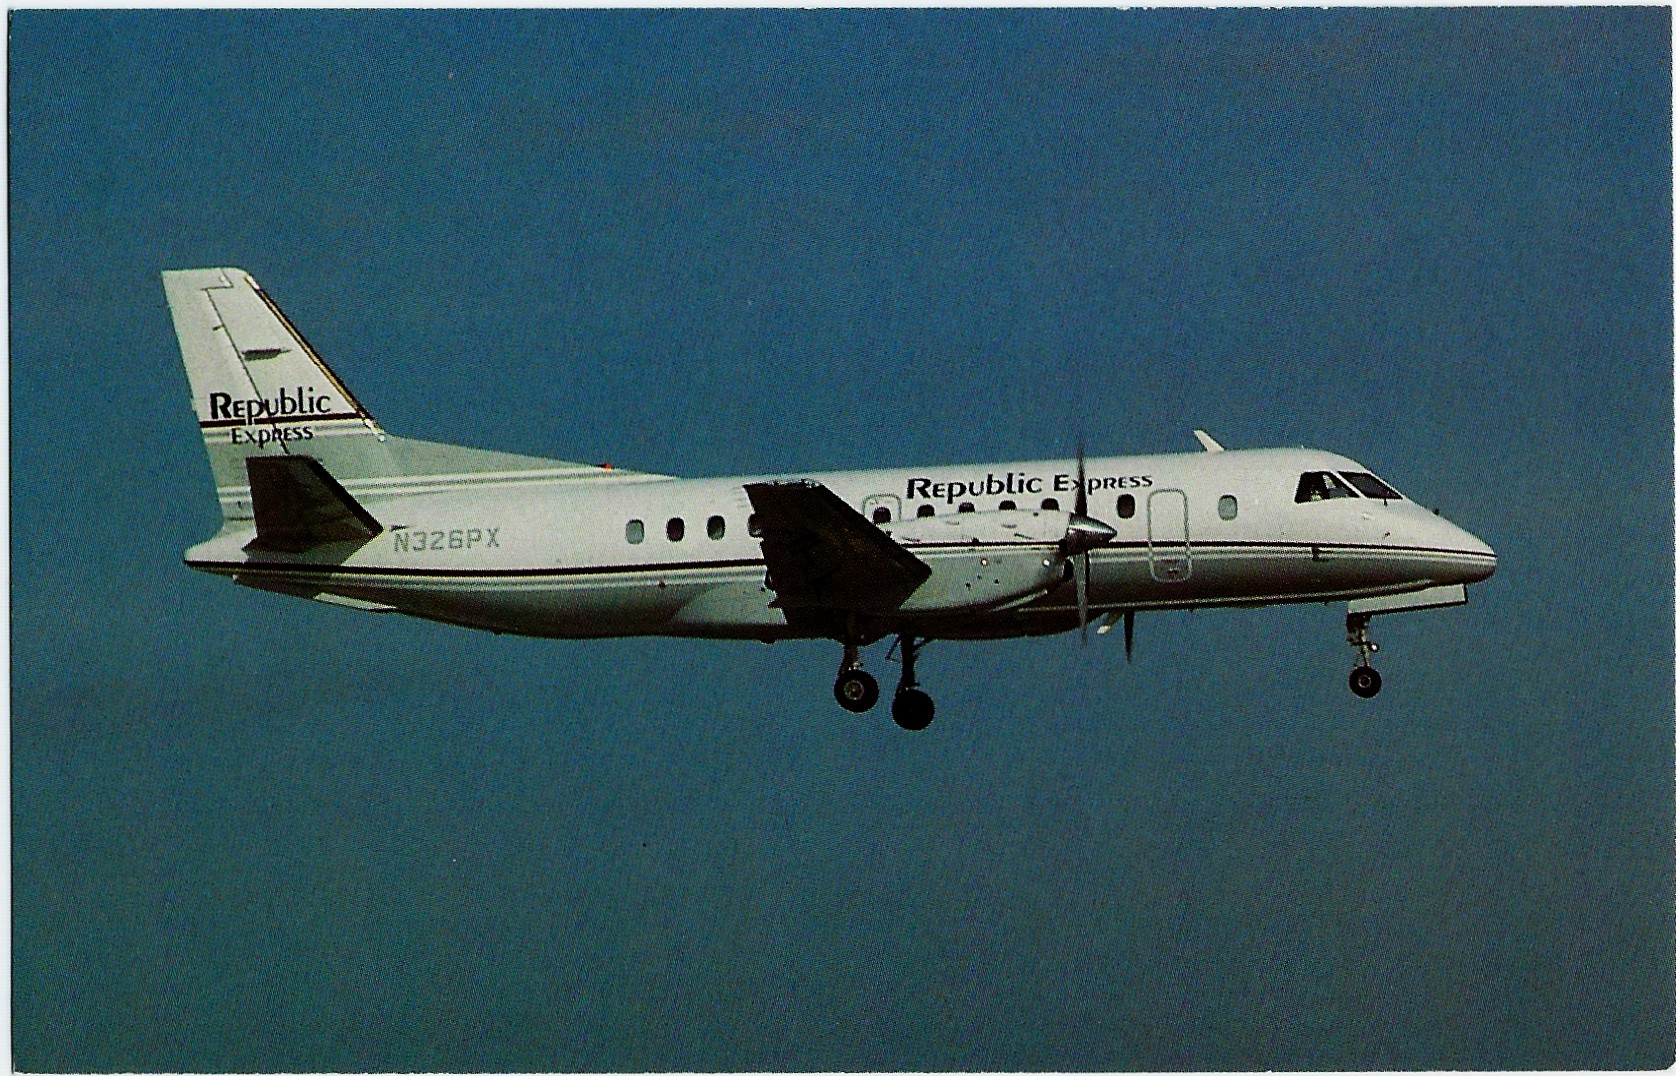 REPUBLIC EXPRESS/EXPRESS AIRLINES I Airplane Postcard N326PX